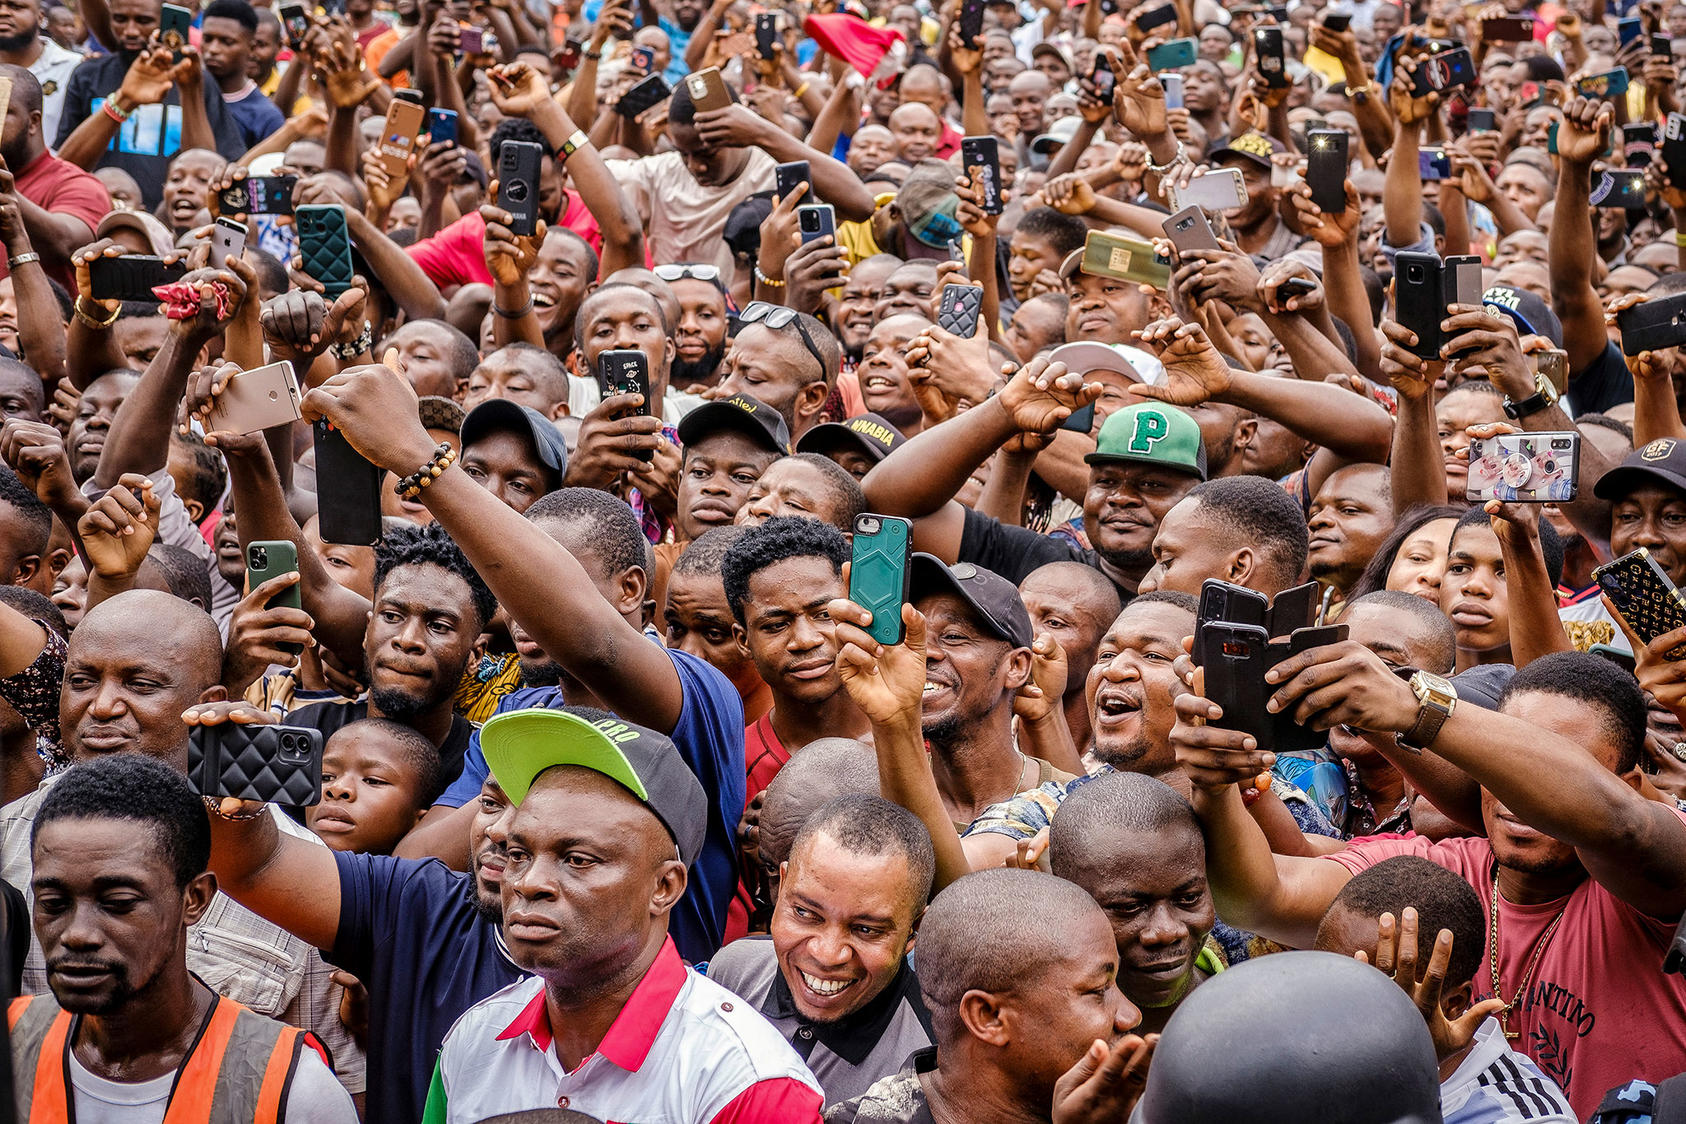 Nigerians in Lagos cheer and snap photos at a February rally for presidential candidate Peter Obi in a three-way race. Obi and rival candidate Atiku Abubakar are challenging the election’s declared outcome in court. (Taiwo Aina/The New York Times)